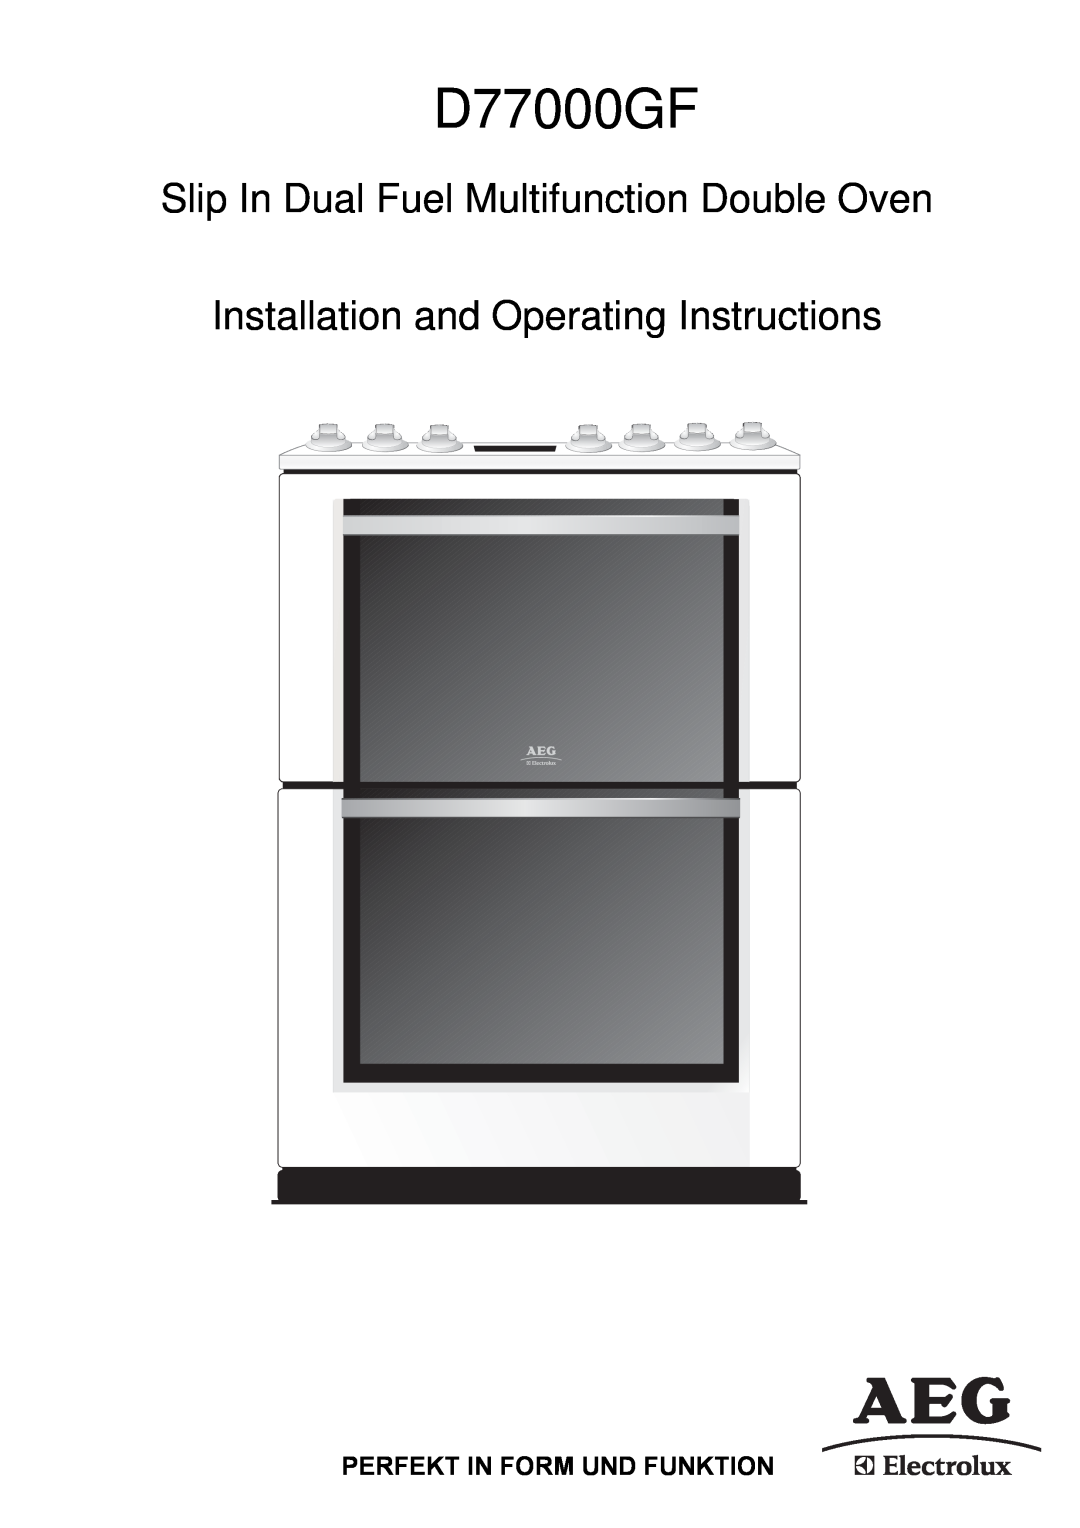 Electrolux D77000GF operating instructions Perfekt In Form Und Funktion, Slip In Dual Fuel Multifunction Double Oven 